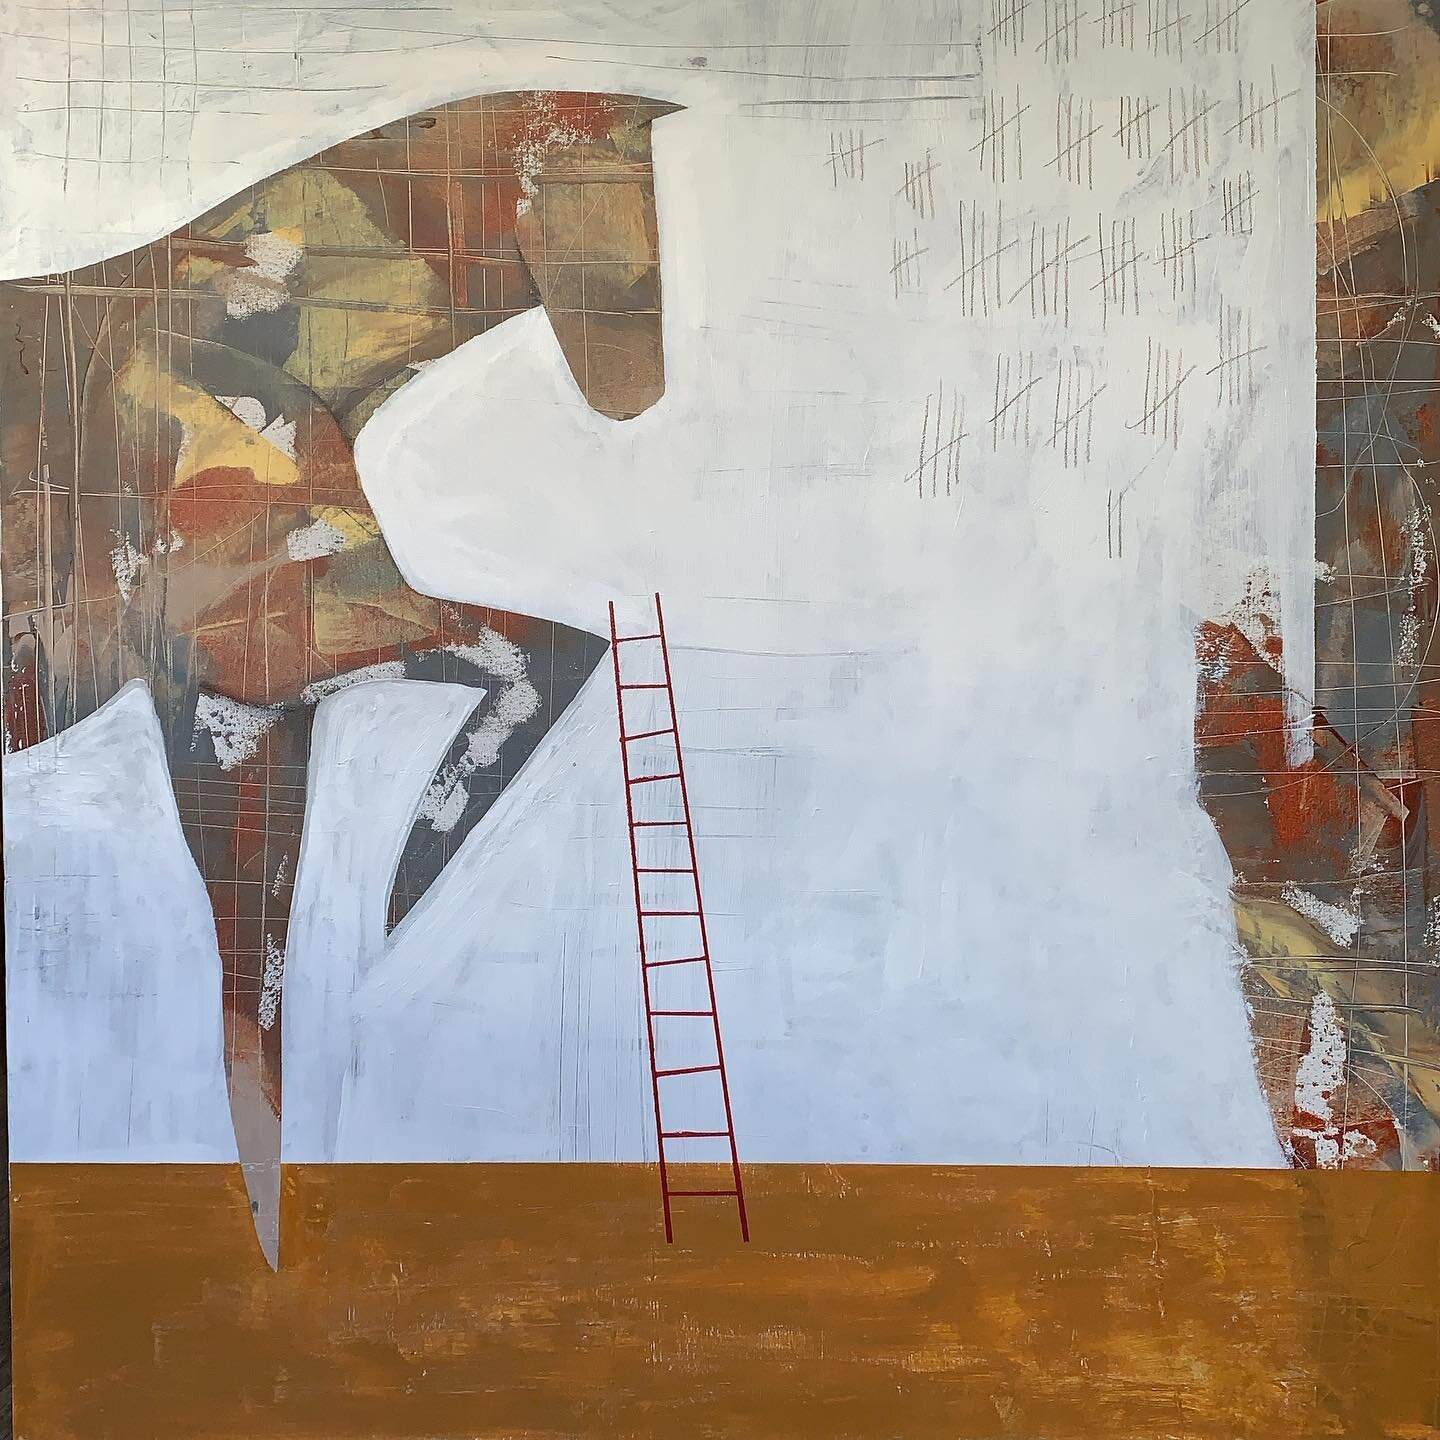 Can you trust a Trojan Horse? Another piece created recently to capture how I&rsquo;ve been thinking and feeling over the last weird months. A false sense of confidence yet the temptation remains. #conceptualart #horse #trojanhorse #paulwood_artist #